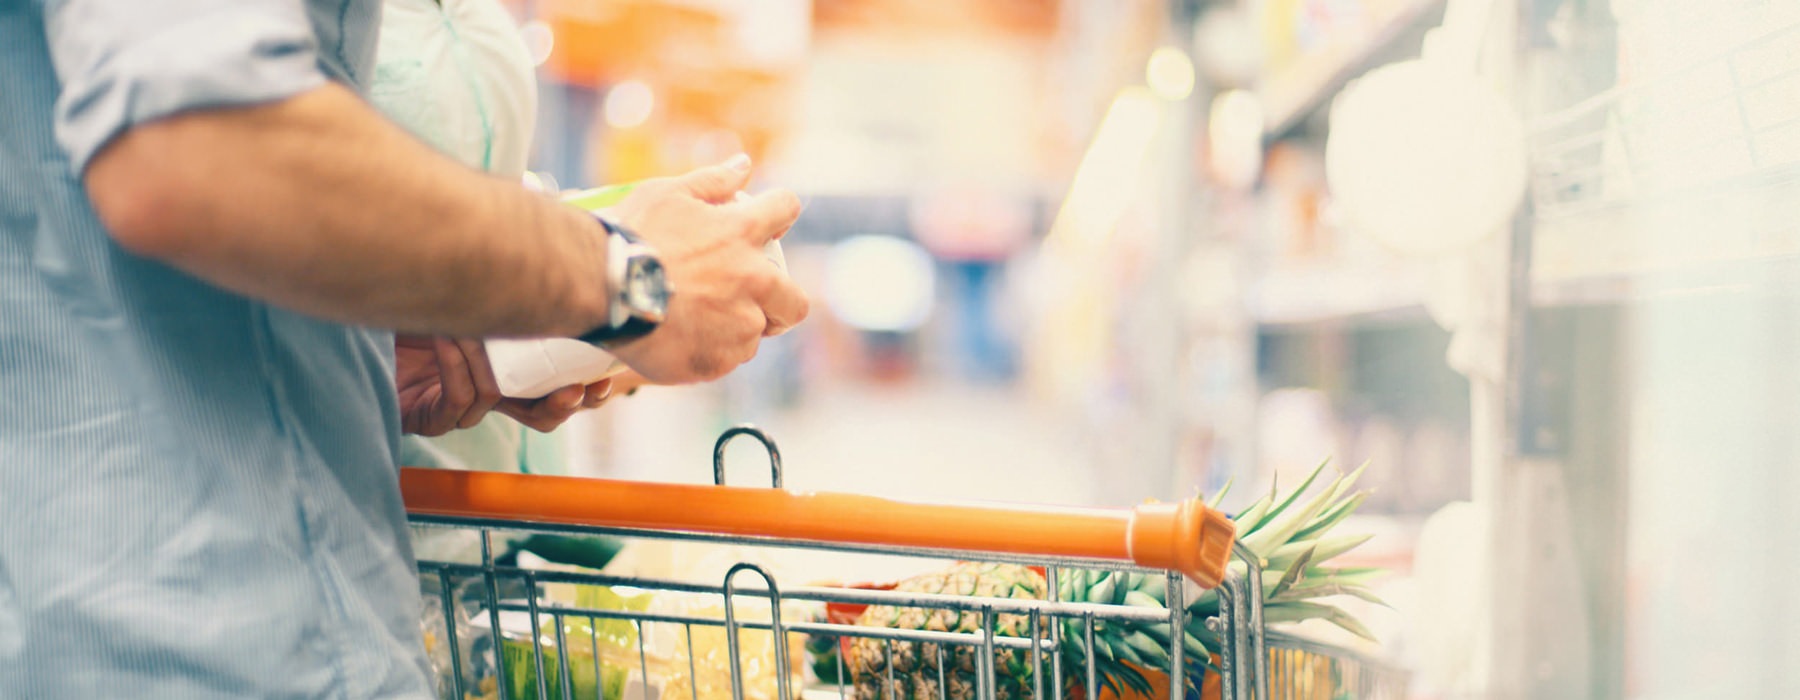 close up of man's full shopping cart in neighborhood grocery store